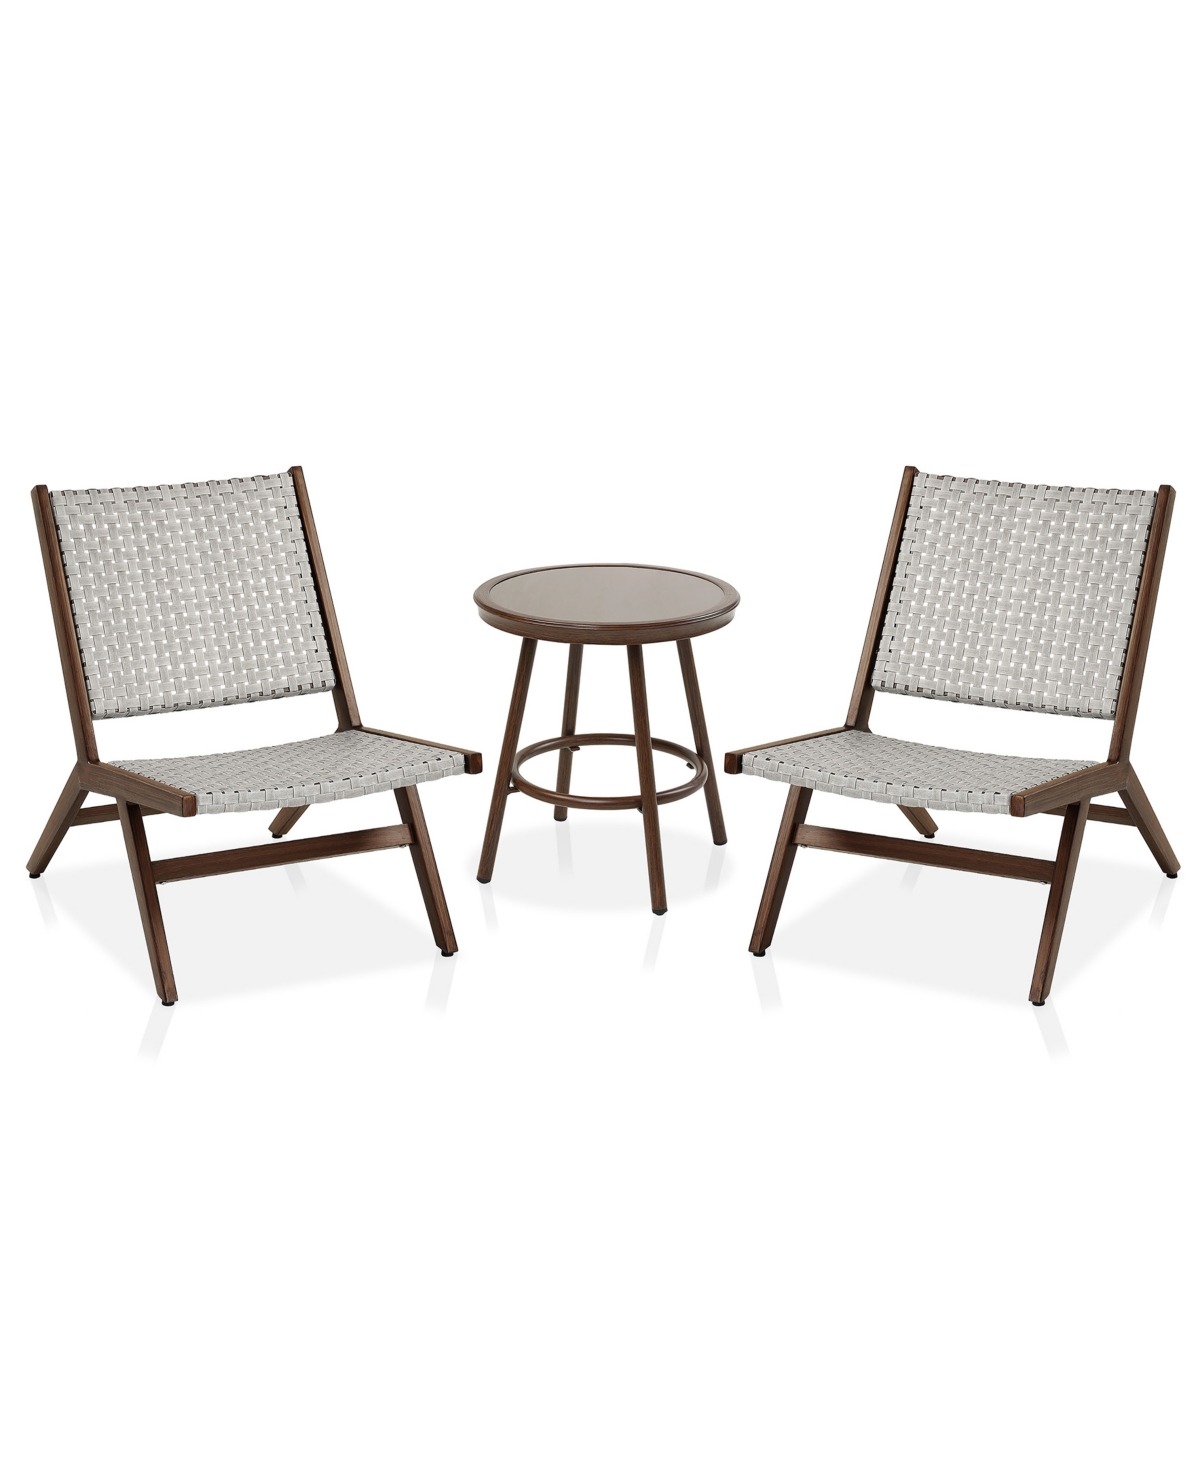 Furniture Of America Adagio Chair And Table 3 Piece Set In Light Gray